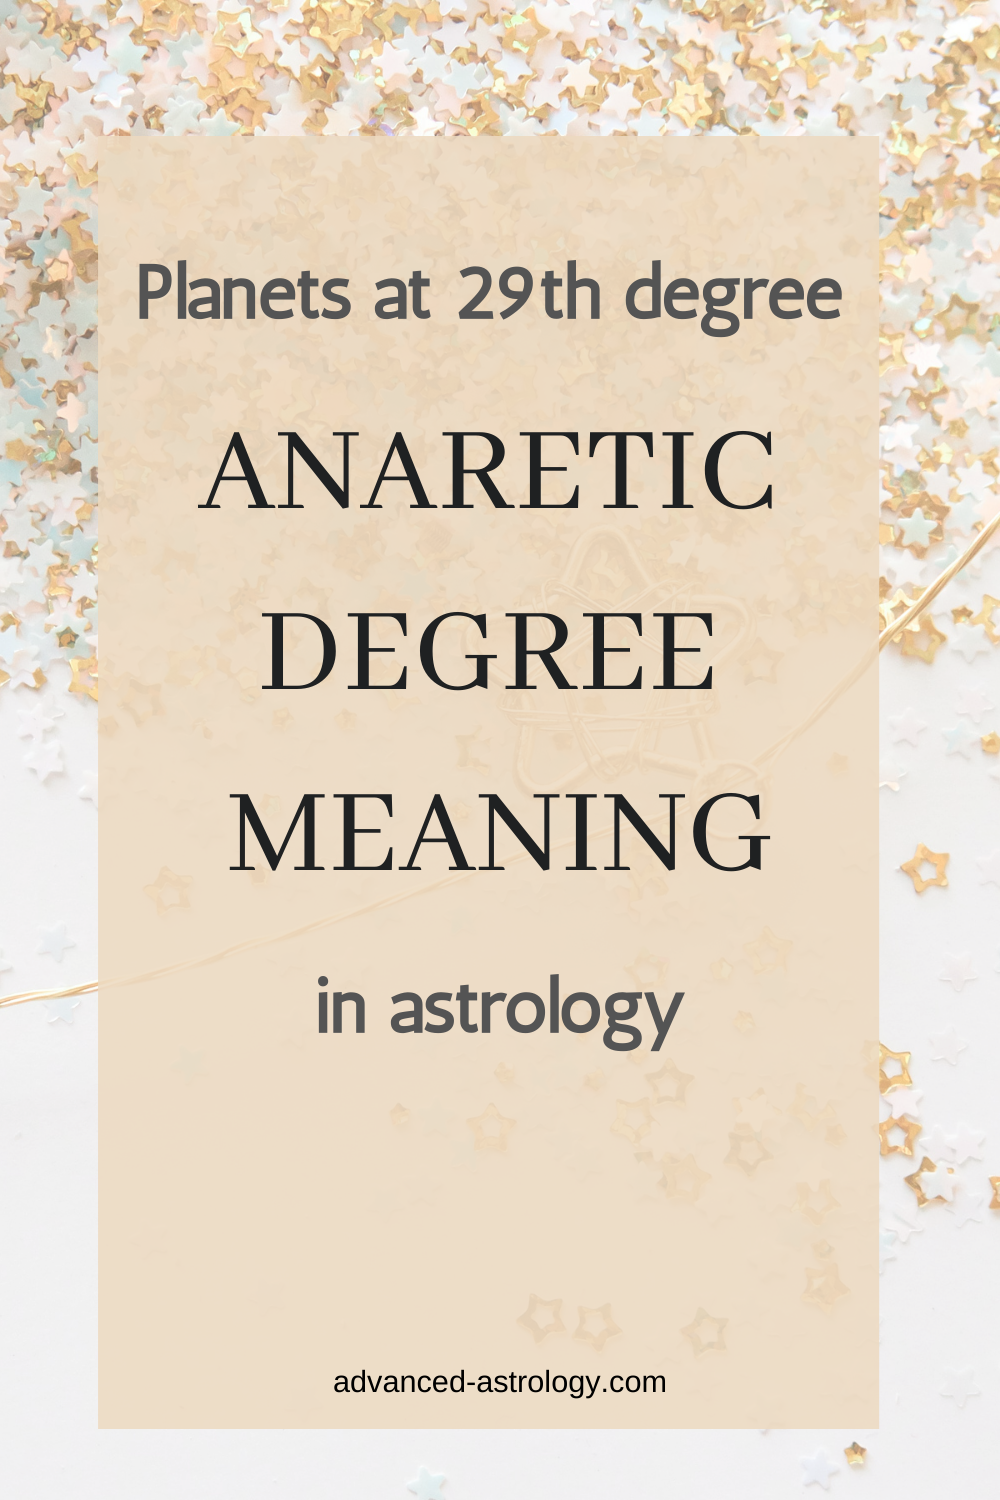 30 degree in astrology